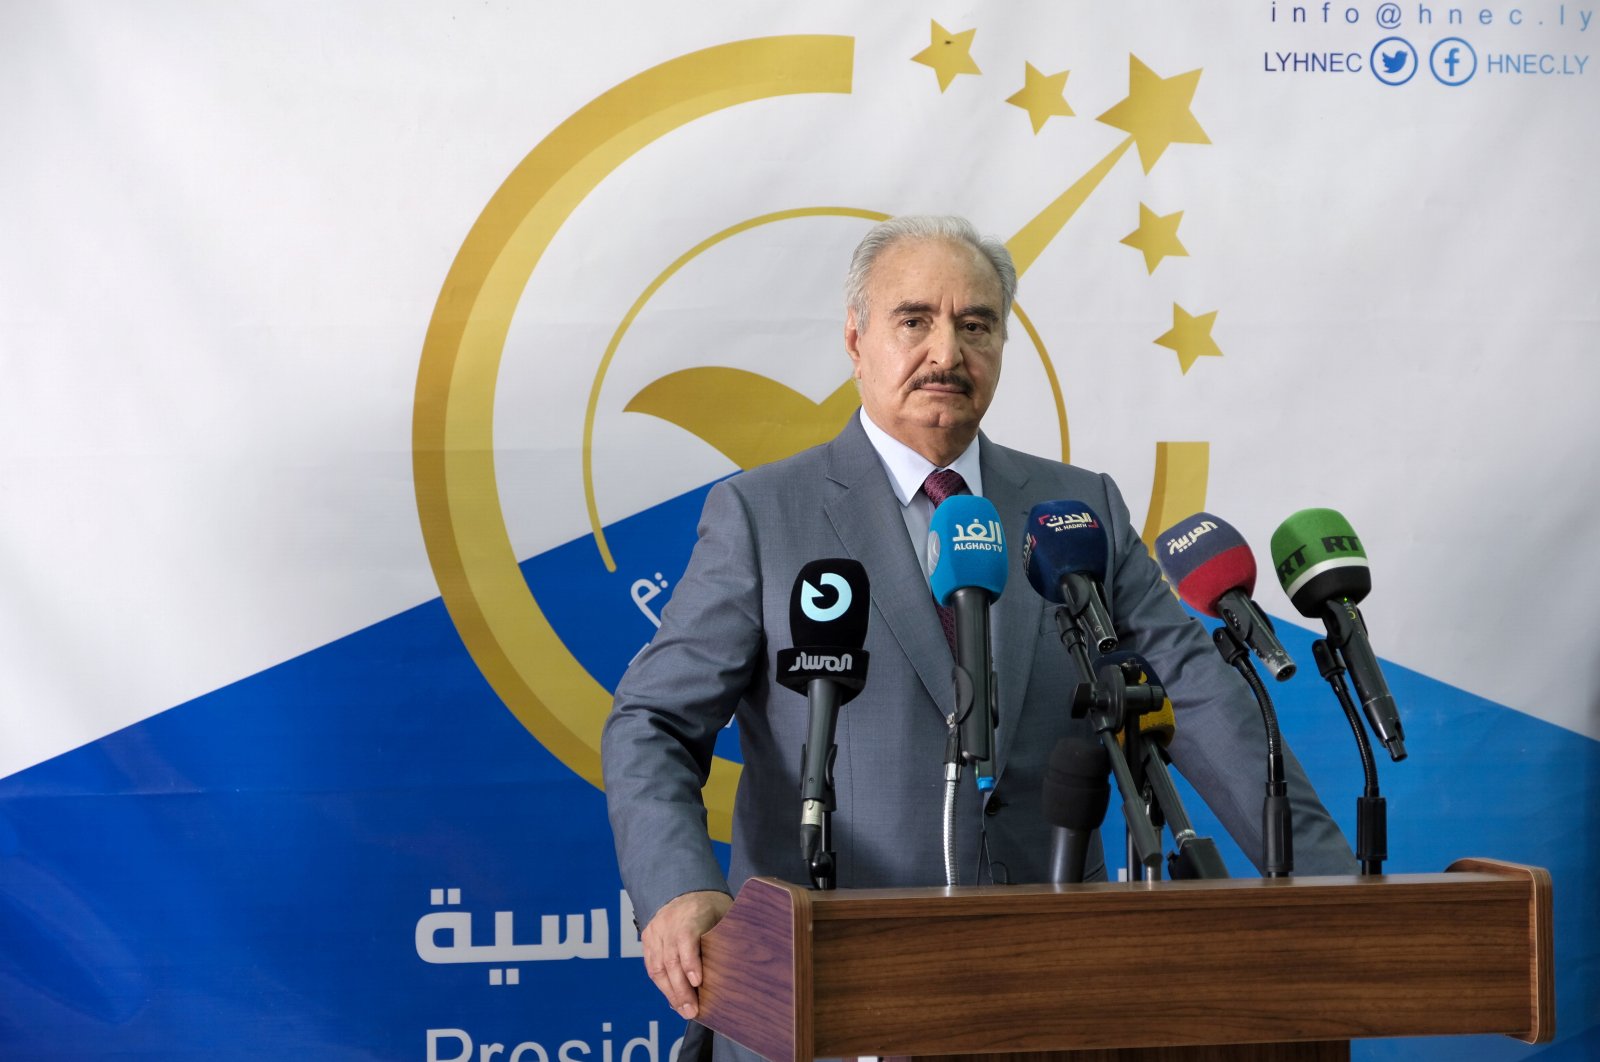 Libya&#039;s eastern commander putschist Gen. Khalifa Haftar speaks to the media after submitting his candidacy papers for the December presidential election, in Benghazi, Libya, November 16, 2021. REUTERS/Esam Omran Al-Fetori/File Photo